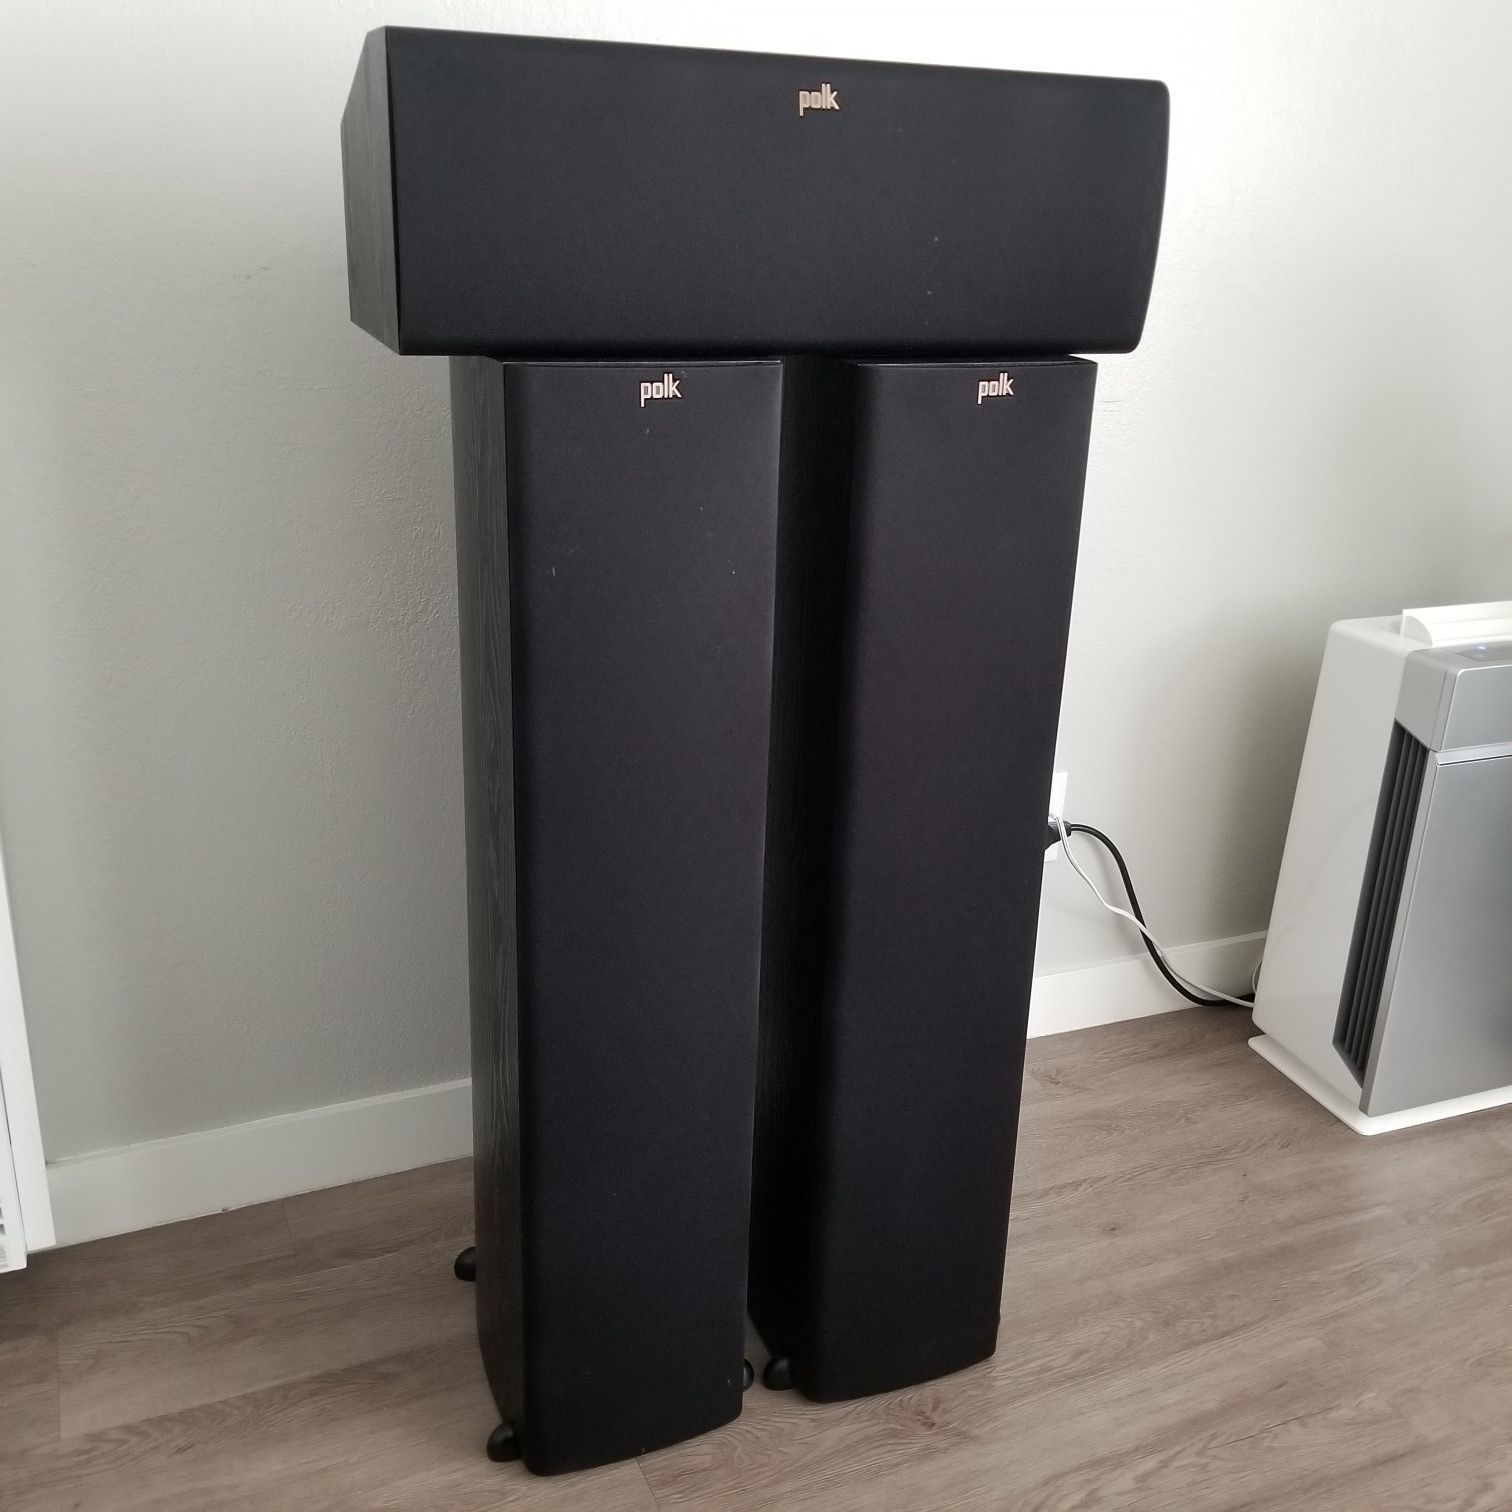 Polk Audio towers (Tsx330t)with matching Center speaker (Tsx250c)